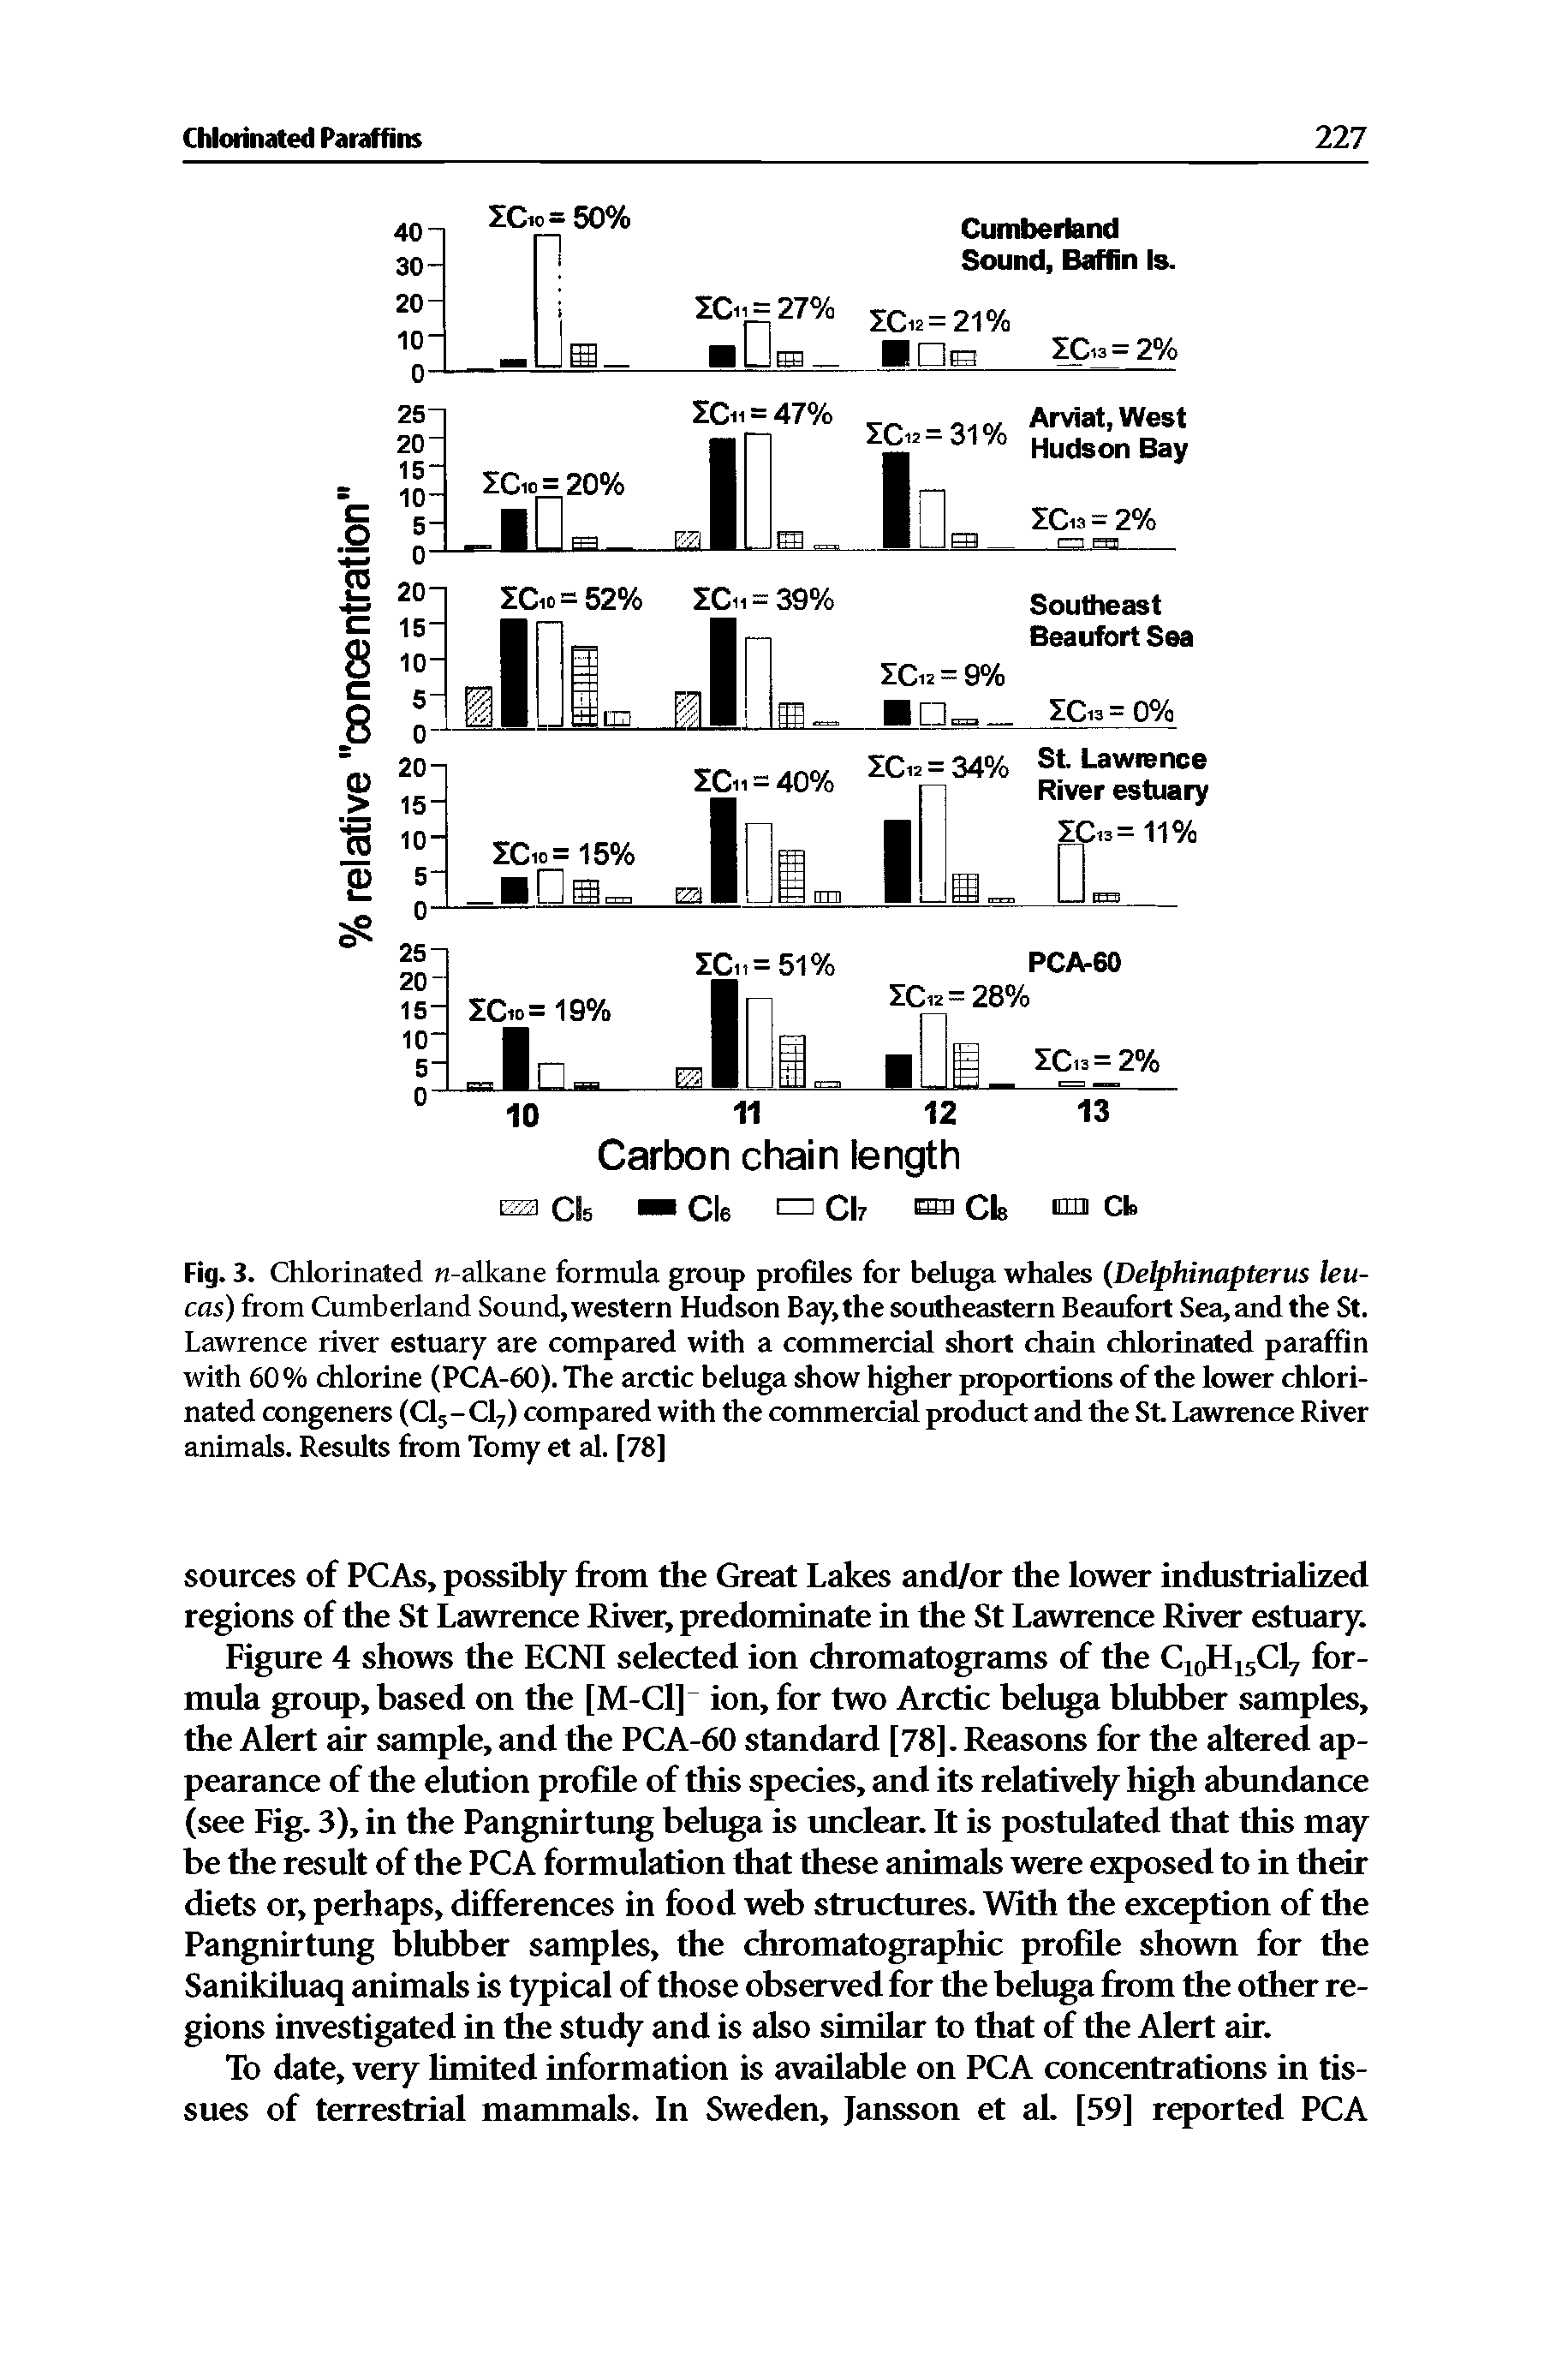 Fig. 3. Chlorinated n-alkane formula group profiles for beluga whales (Delphinapterus leu-cas) from Cumberland Sound, western Hudson Bay, the southeastern Beaufort Sea, and the St. Lawrence river estuary are compared with a commercial short chain chlorinated paraffin with 60% chlorine (PCA-60). The arctic beluga show higher proportions of the lower chlorinated congeners (C15-C17) compared with the commercial product and the St Lawrence River animals. Results from Tomy et al. [78]...